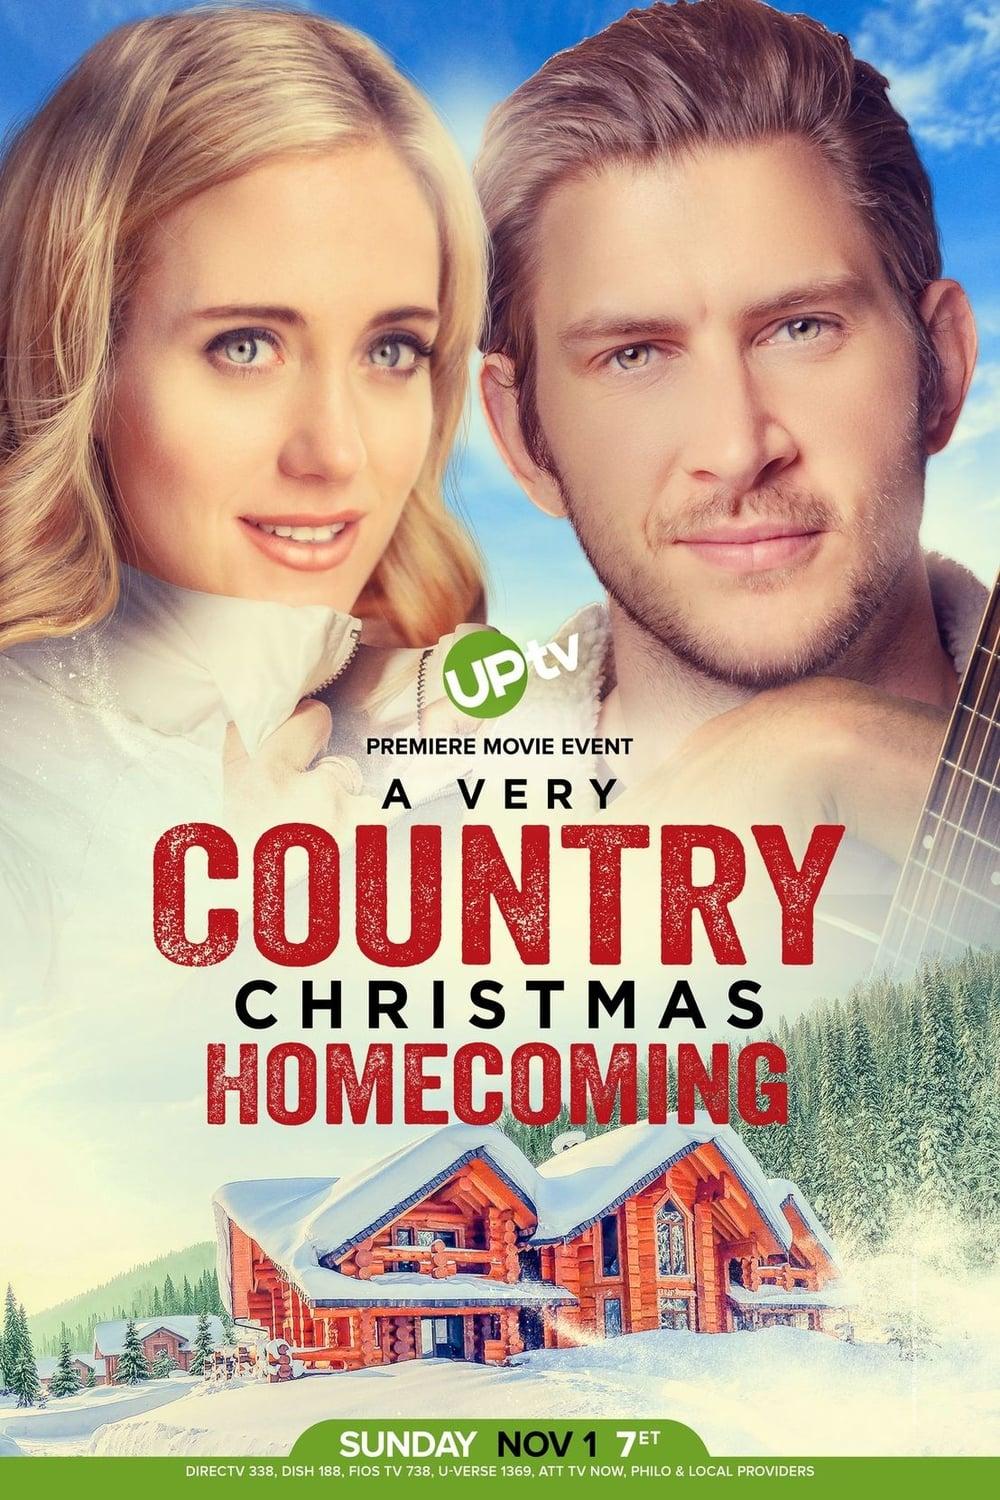 A Very Country Christmas Homecoming poster